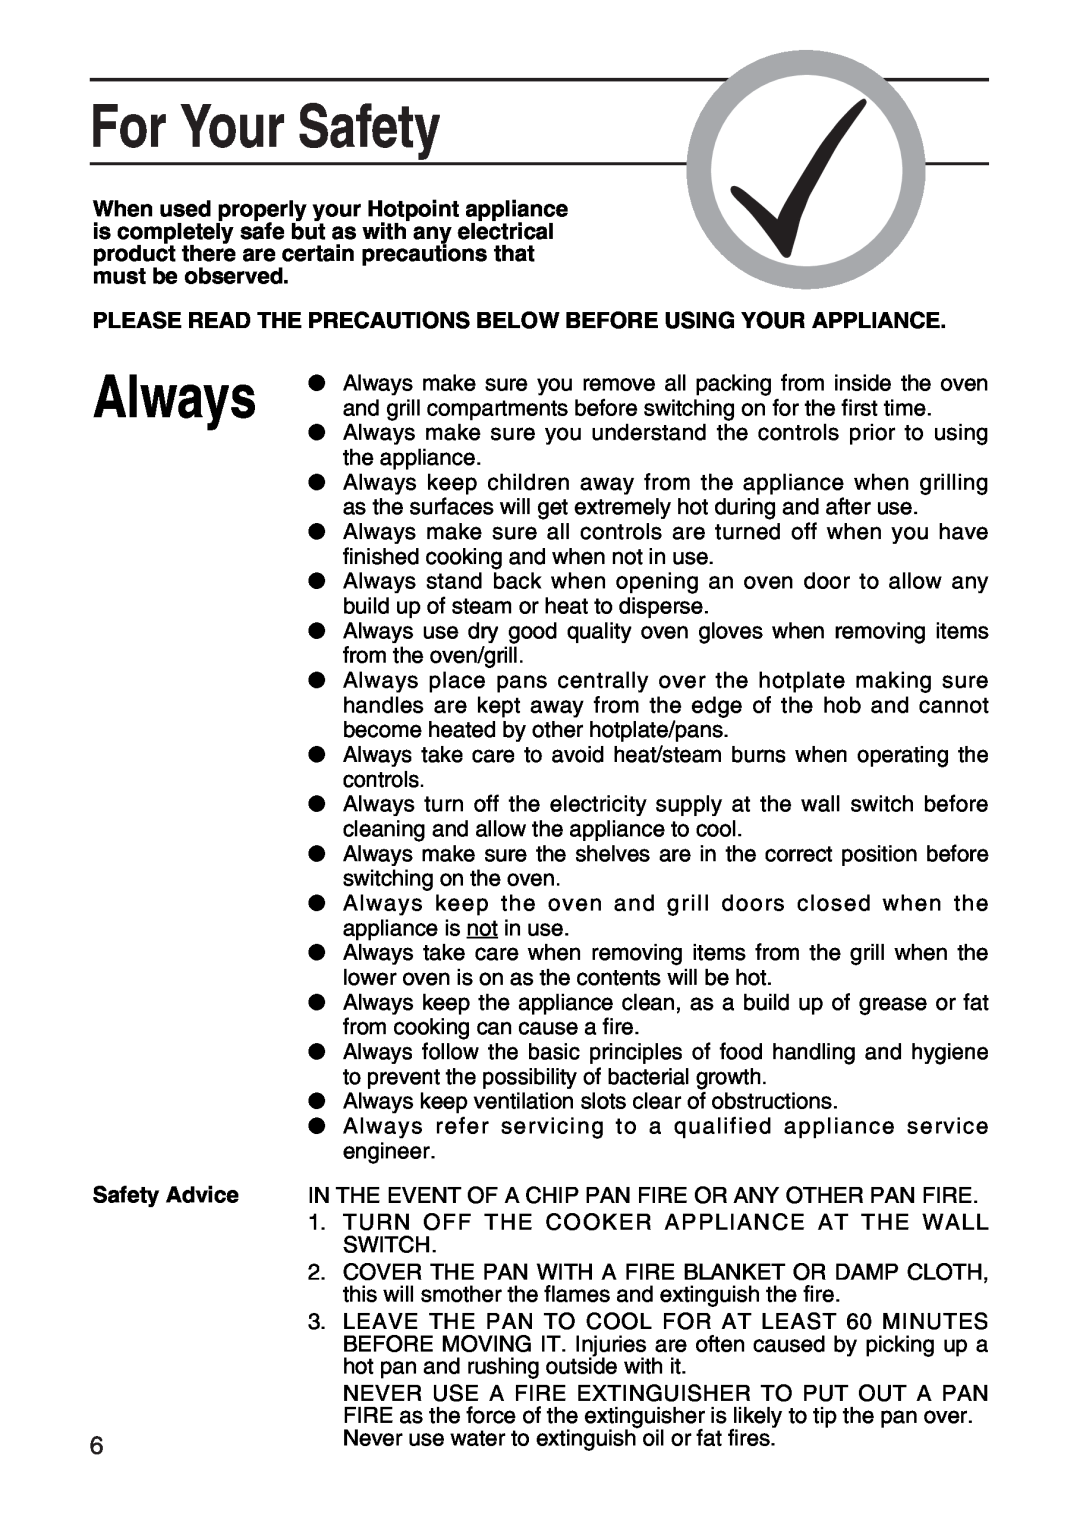 Hotpoint EW41 manual For Your Safety, Always, Safety Advice 